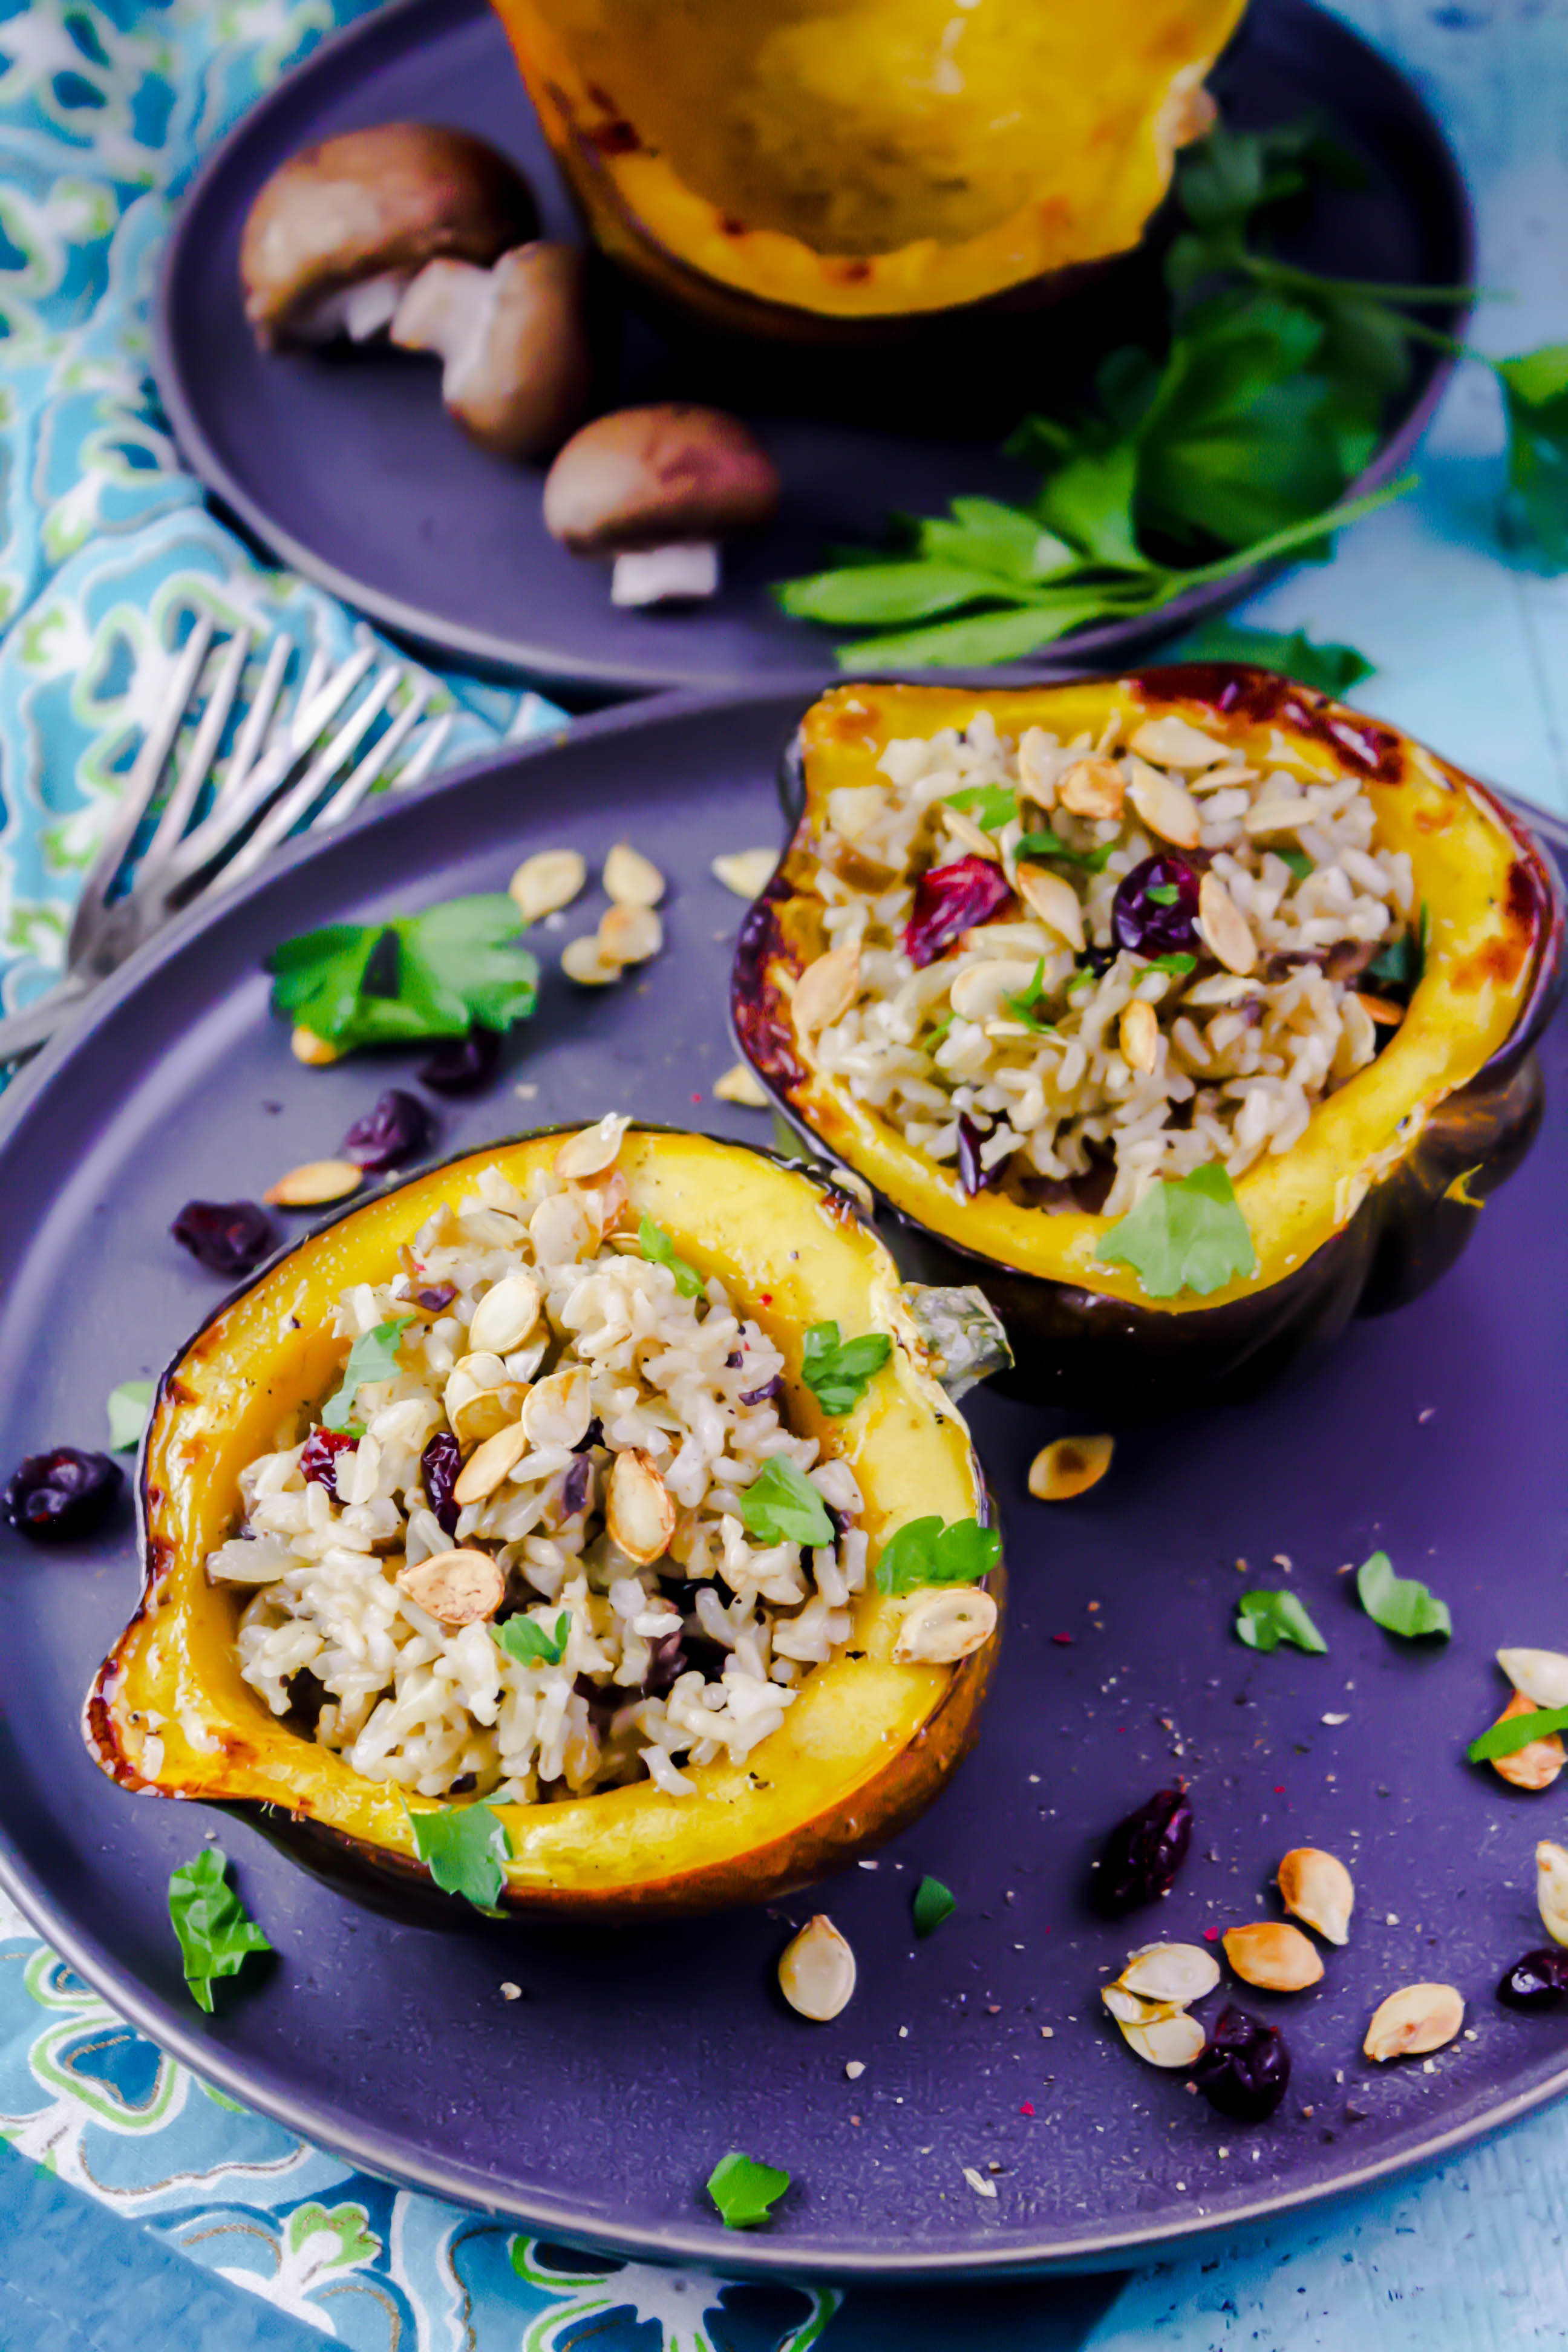 Acorn Squash Stuffed with Brown Rice, Mushrooms, and Cranberries is a great winter dish! You'll enjoy Acorn Squash Stuffed with Brown Rice, Mushrooms, and Cranberries anytime.